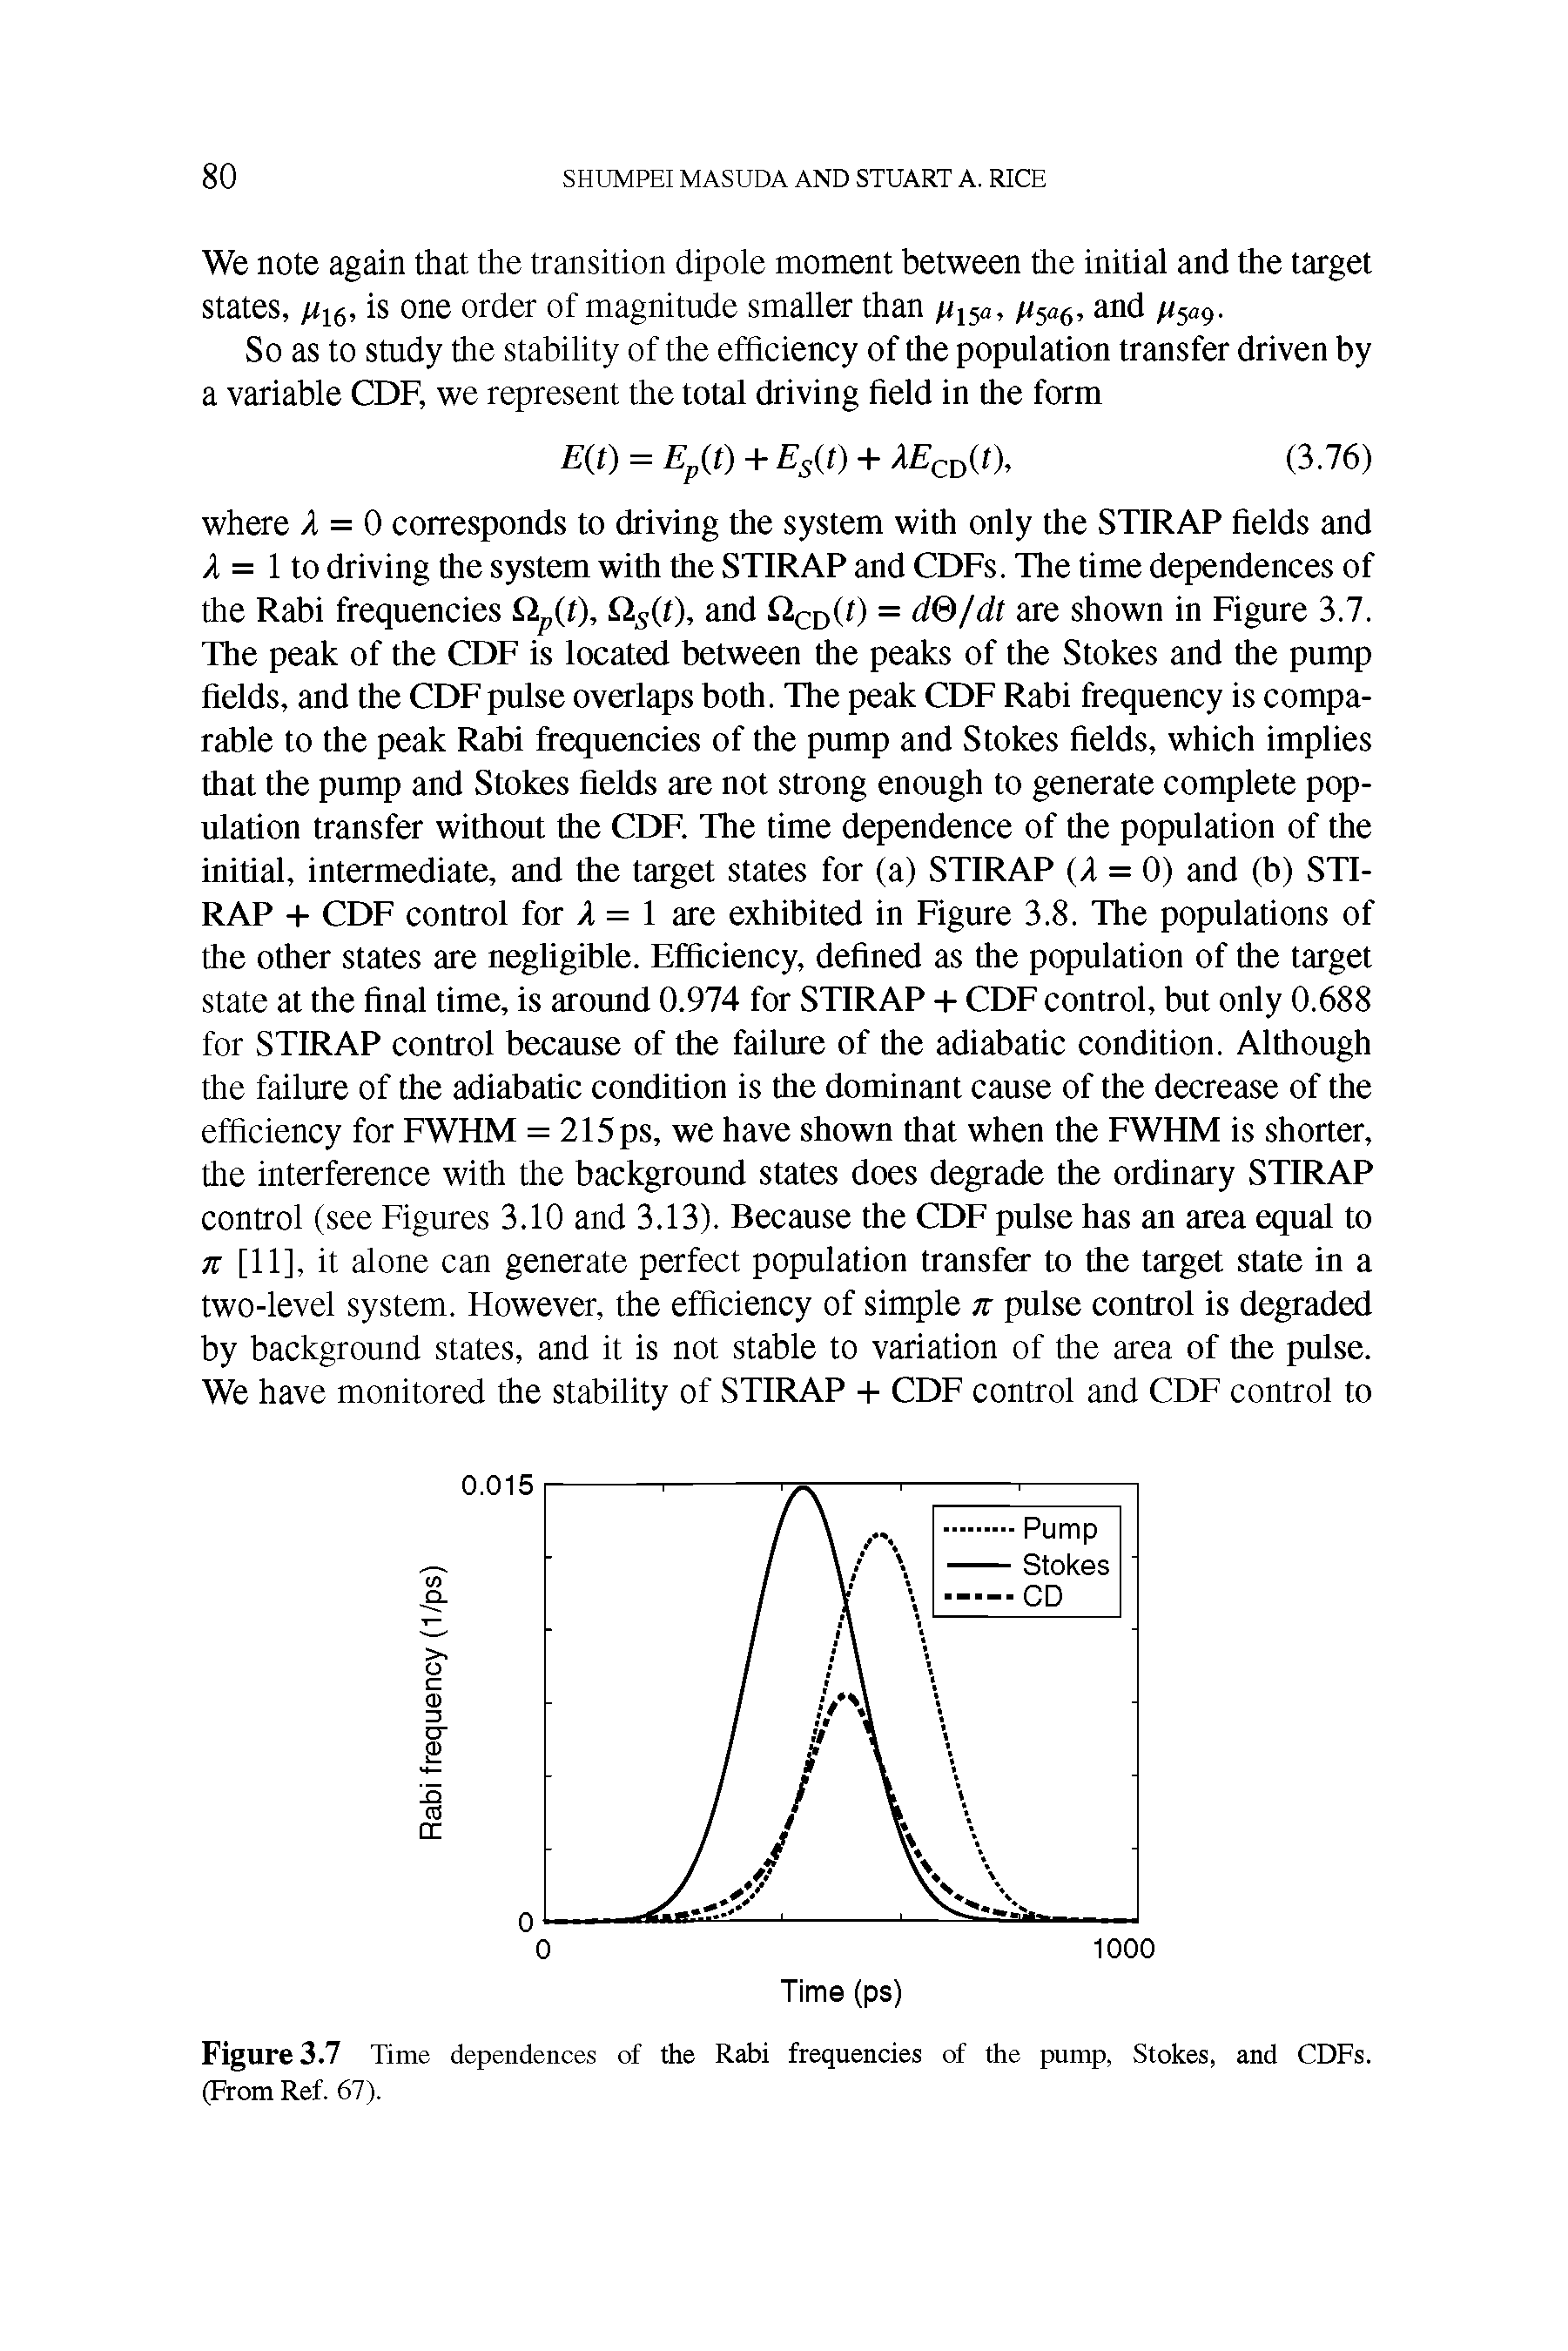 Figure 3.7 Time dependences of the Rabi frequencies of the pump, Stokes, and CDFs. (From Ref. 67).